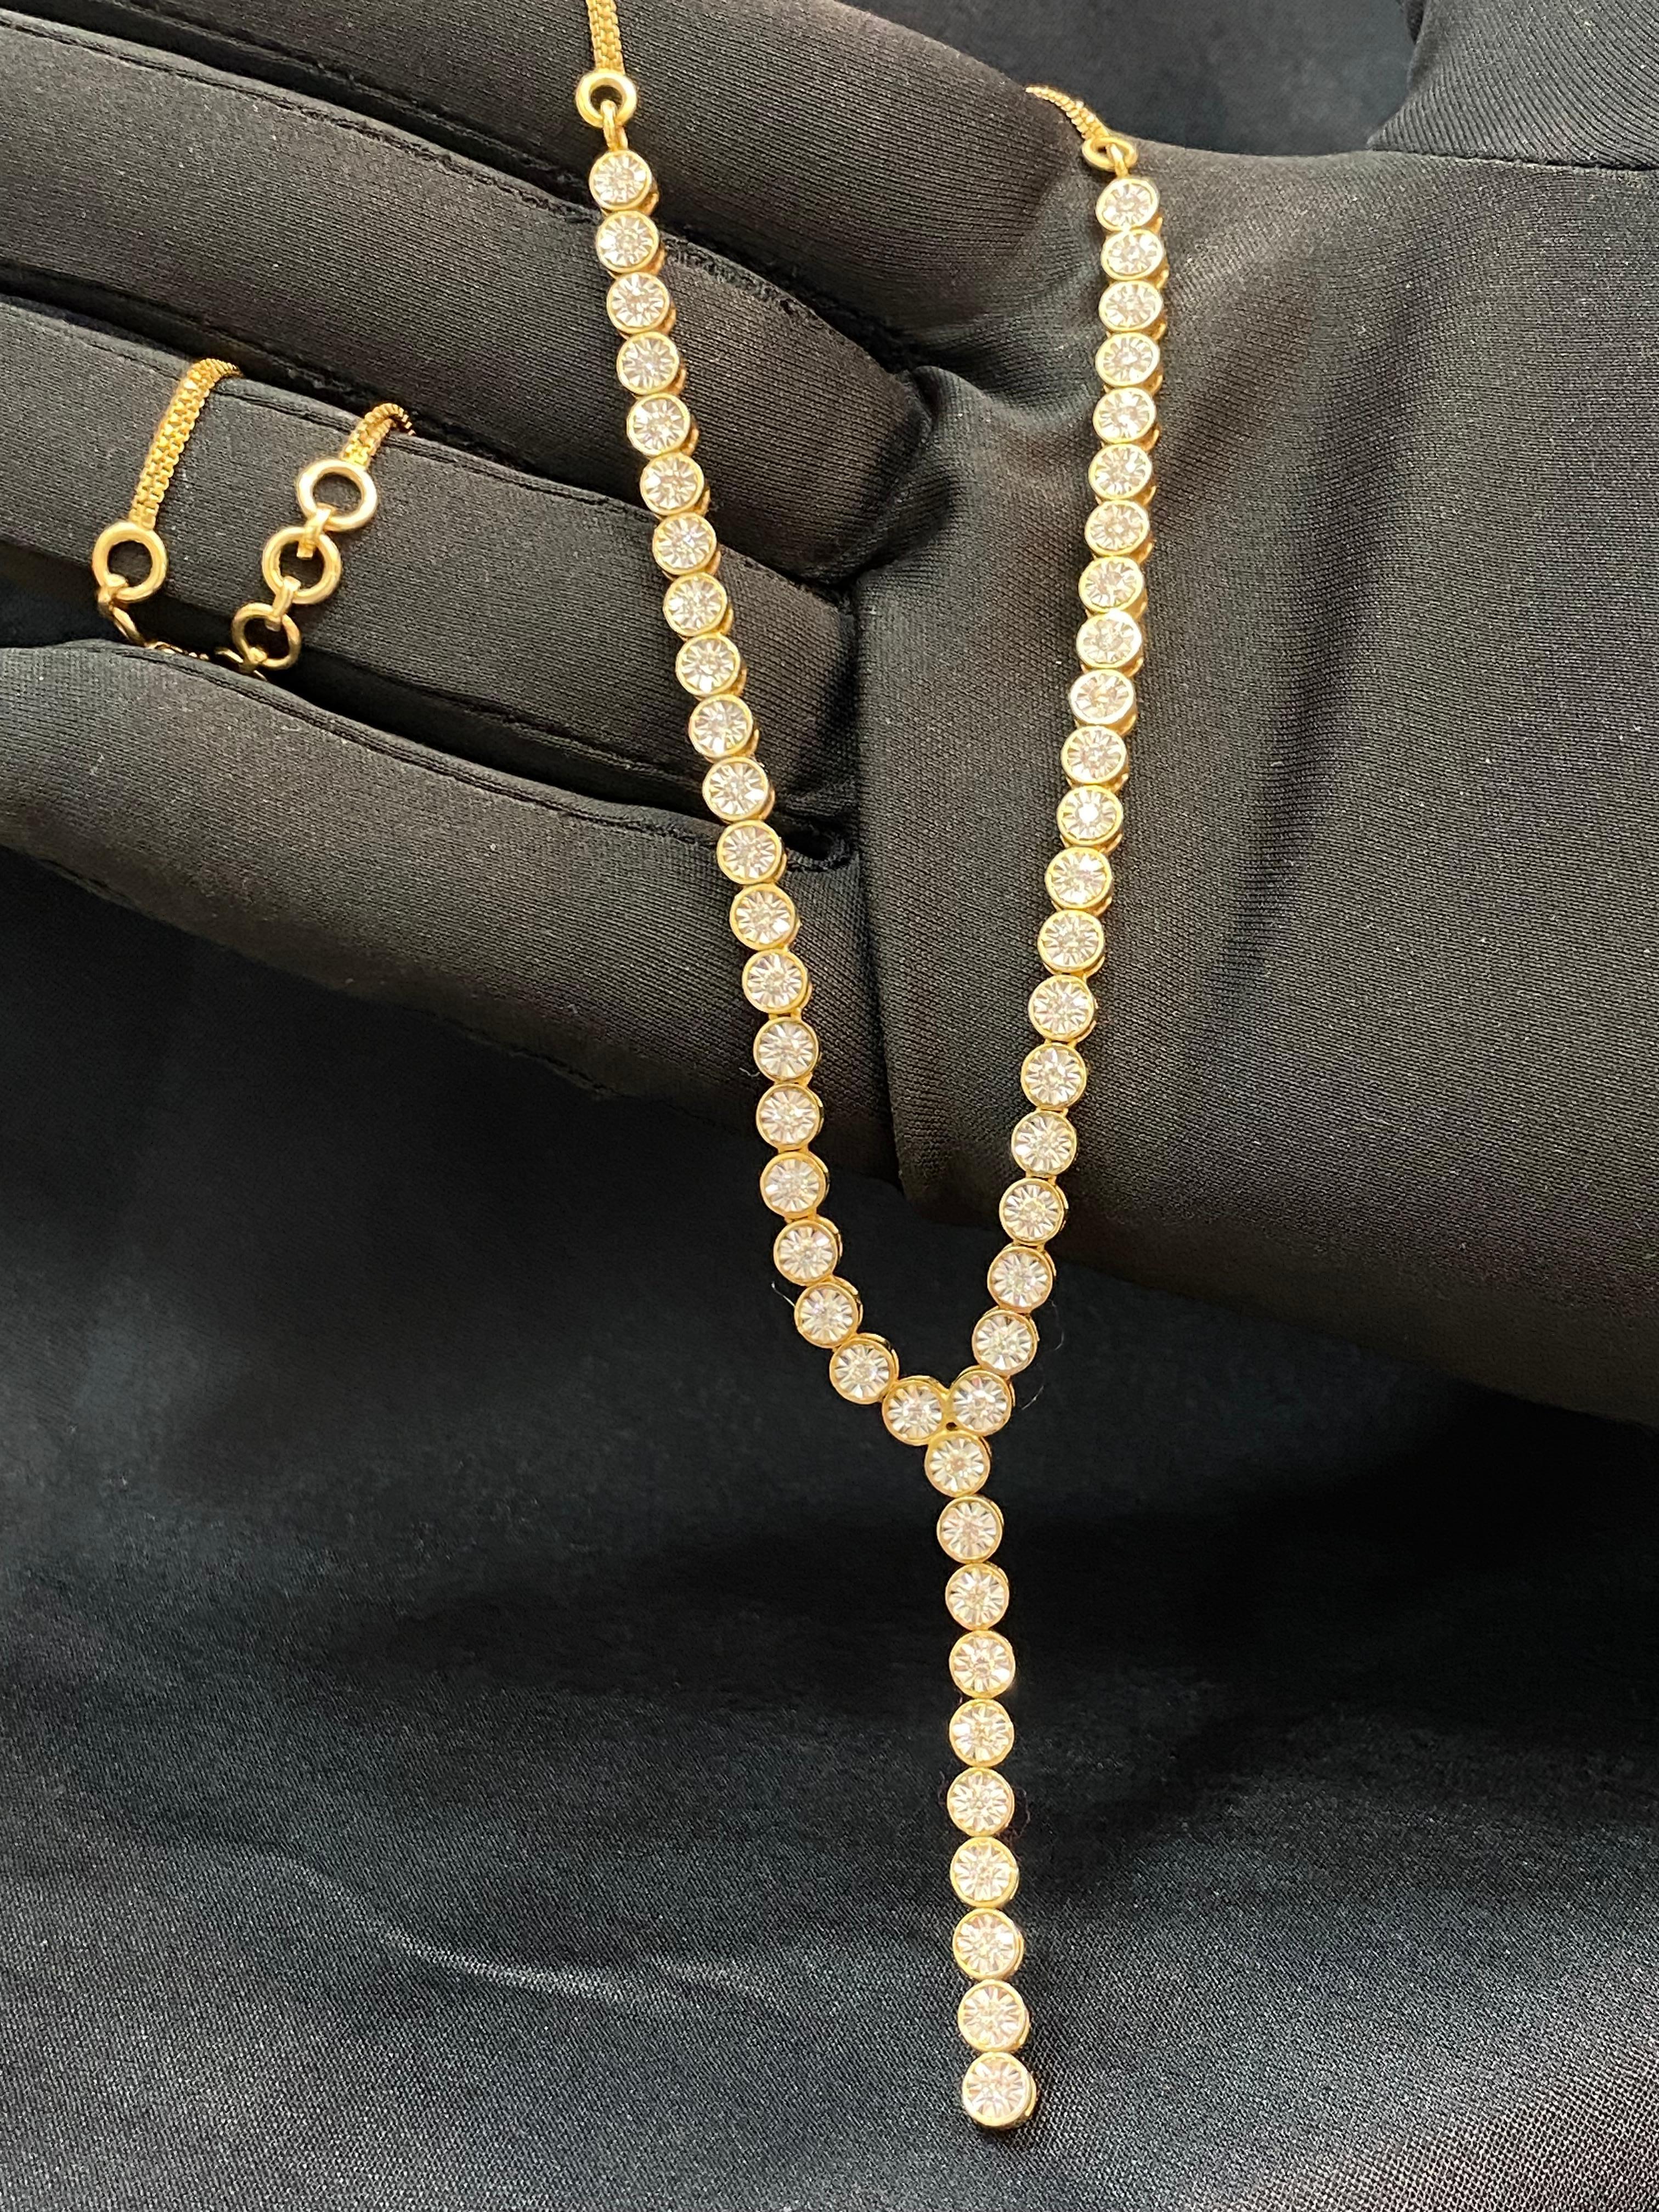 This exquisite necklace showcases a meticulously crafted ensemble of 1.90 carats of Round Brilliant Cut natural diamonds delicately set in an authentic 14K yellow gold tennis necklace. With unparalleled attention to detail, this piece embodies